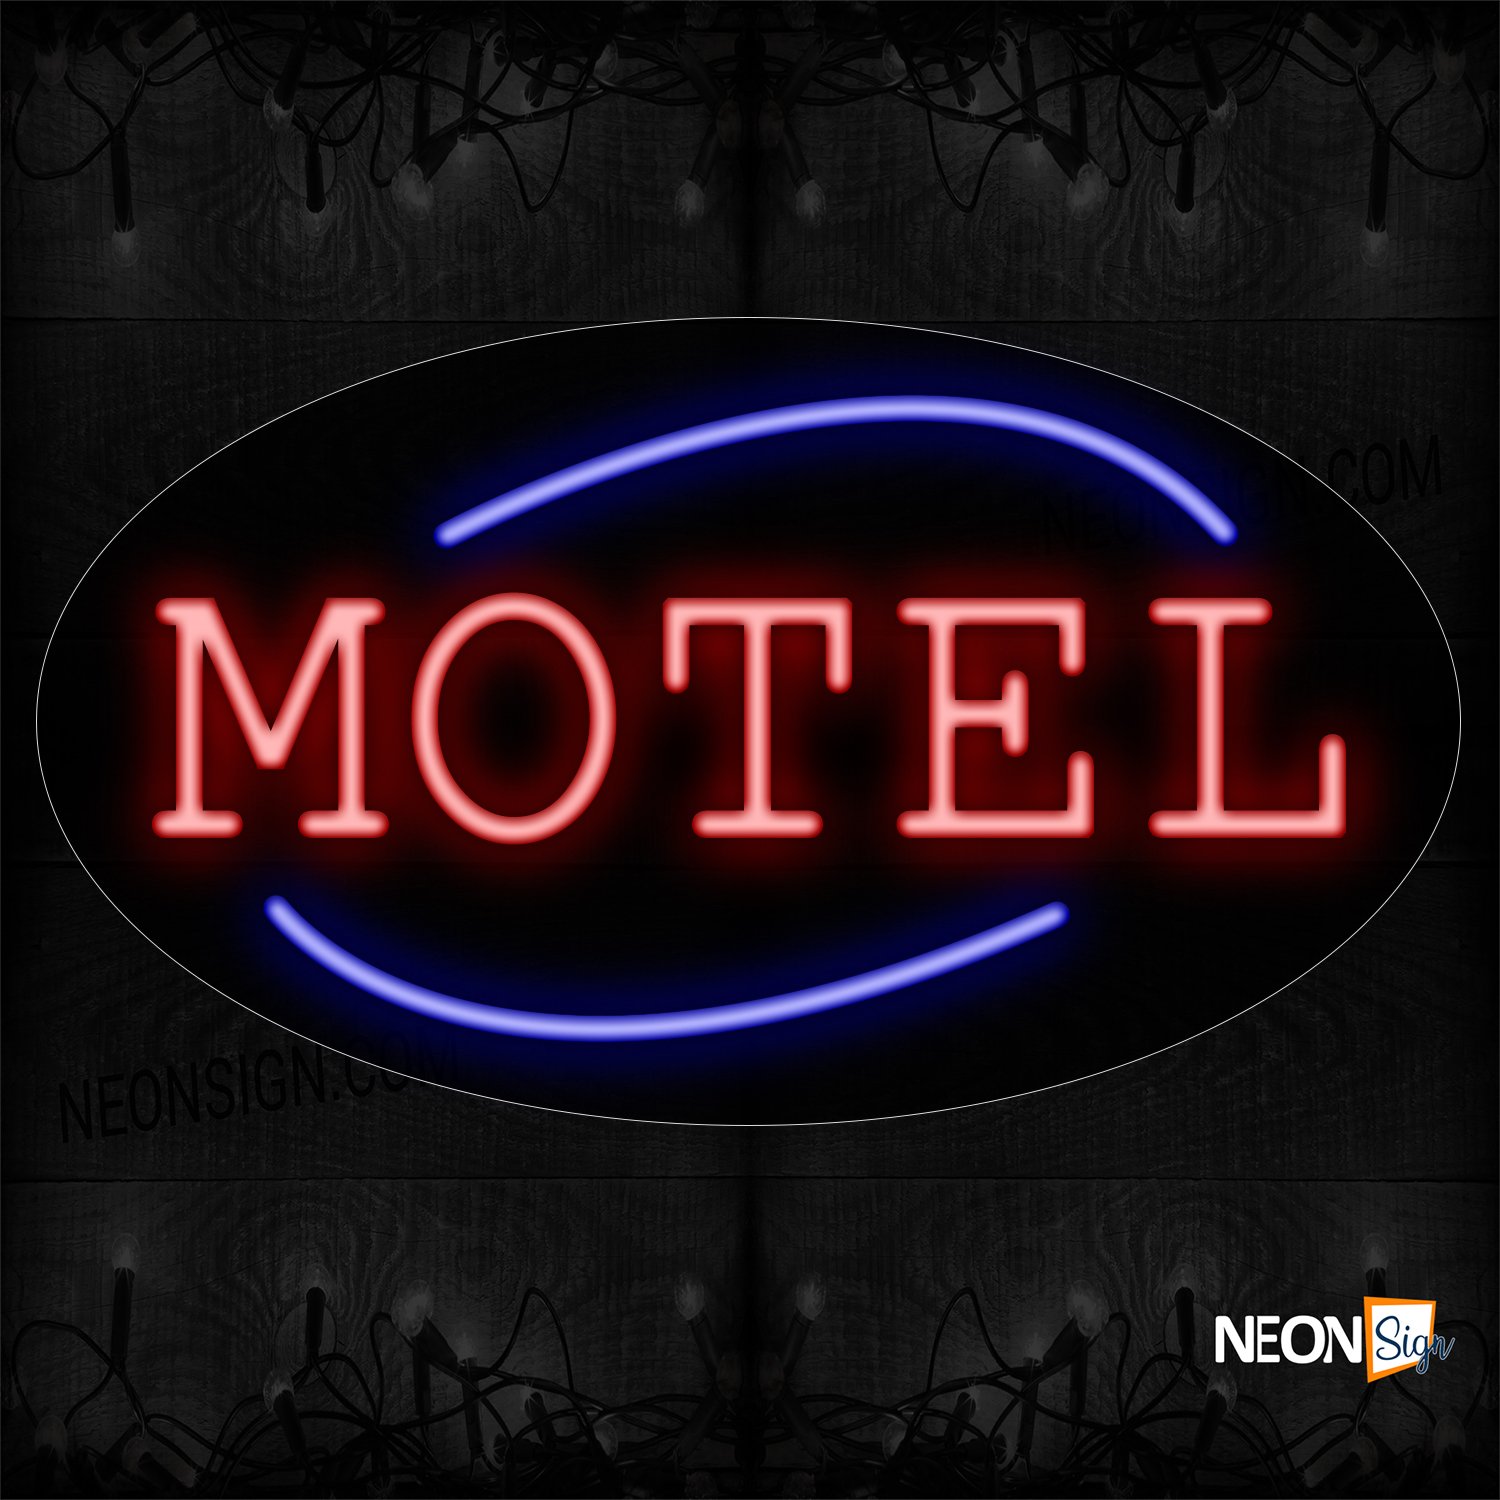 Image of 14251 Motel In Red With Blue Arc Border Neon Sign_17x30 Contoured Black Backing